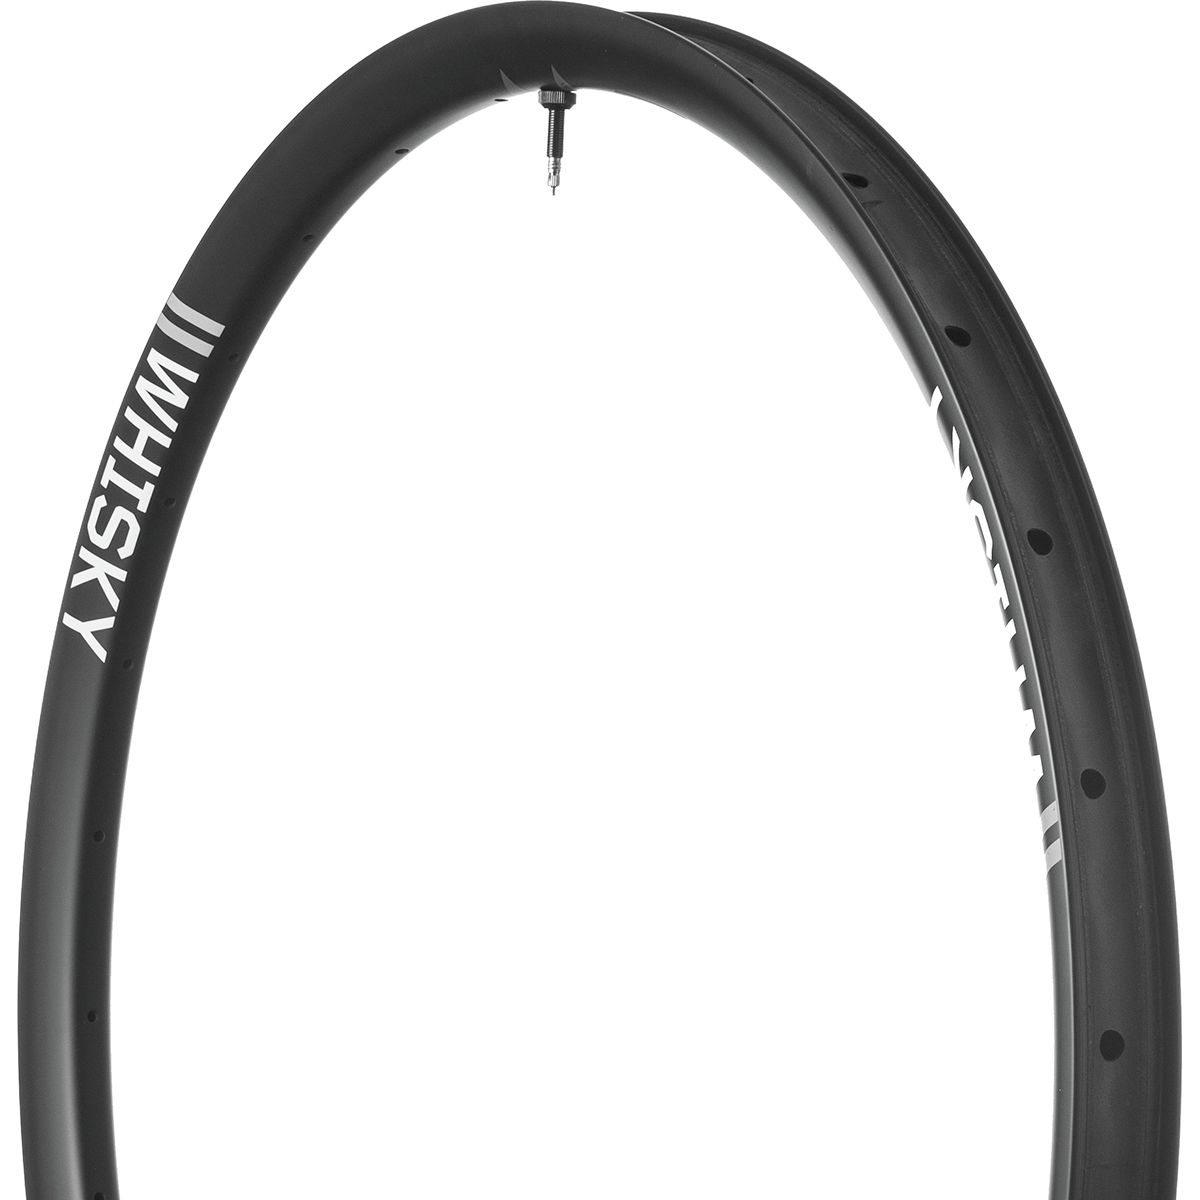 Whisky Parts Co. No.9 Carbon Tubeless Rim - 29in 36w, Matte Black, 30mm, 28h